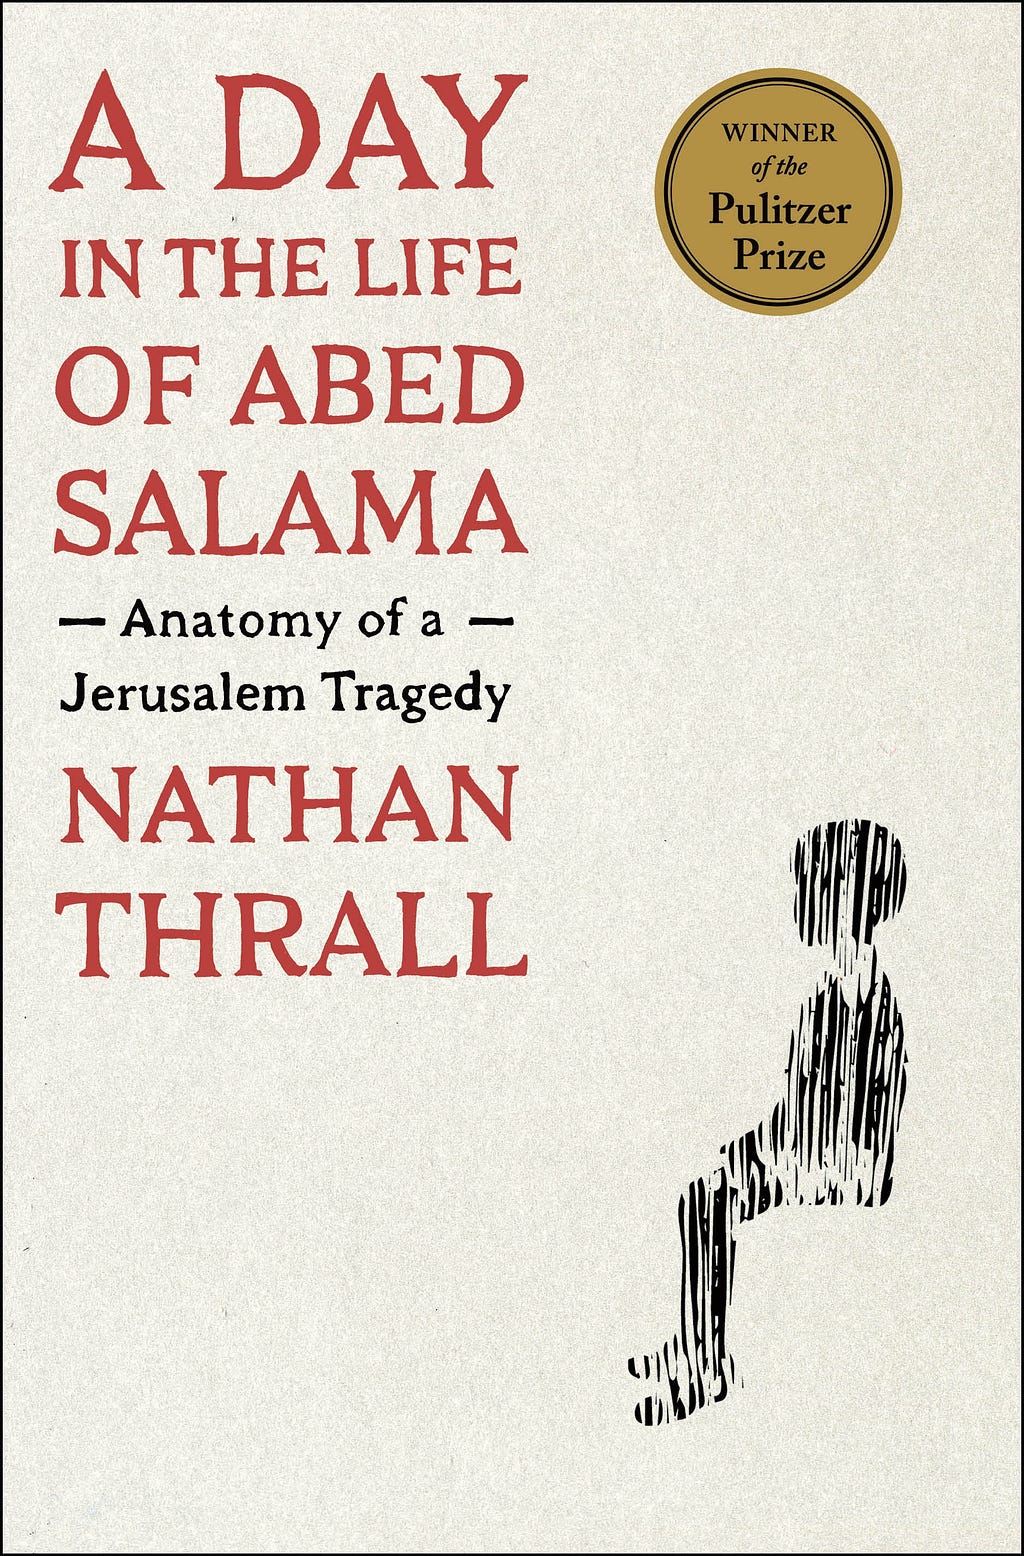 A Day in the Life of Abed Salama: Anatomy of a Jerusalem Tragedy E book